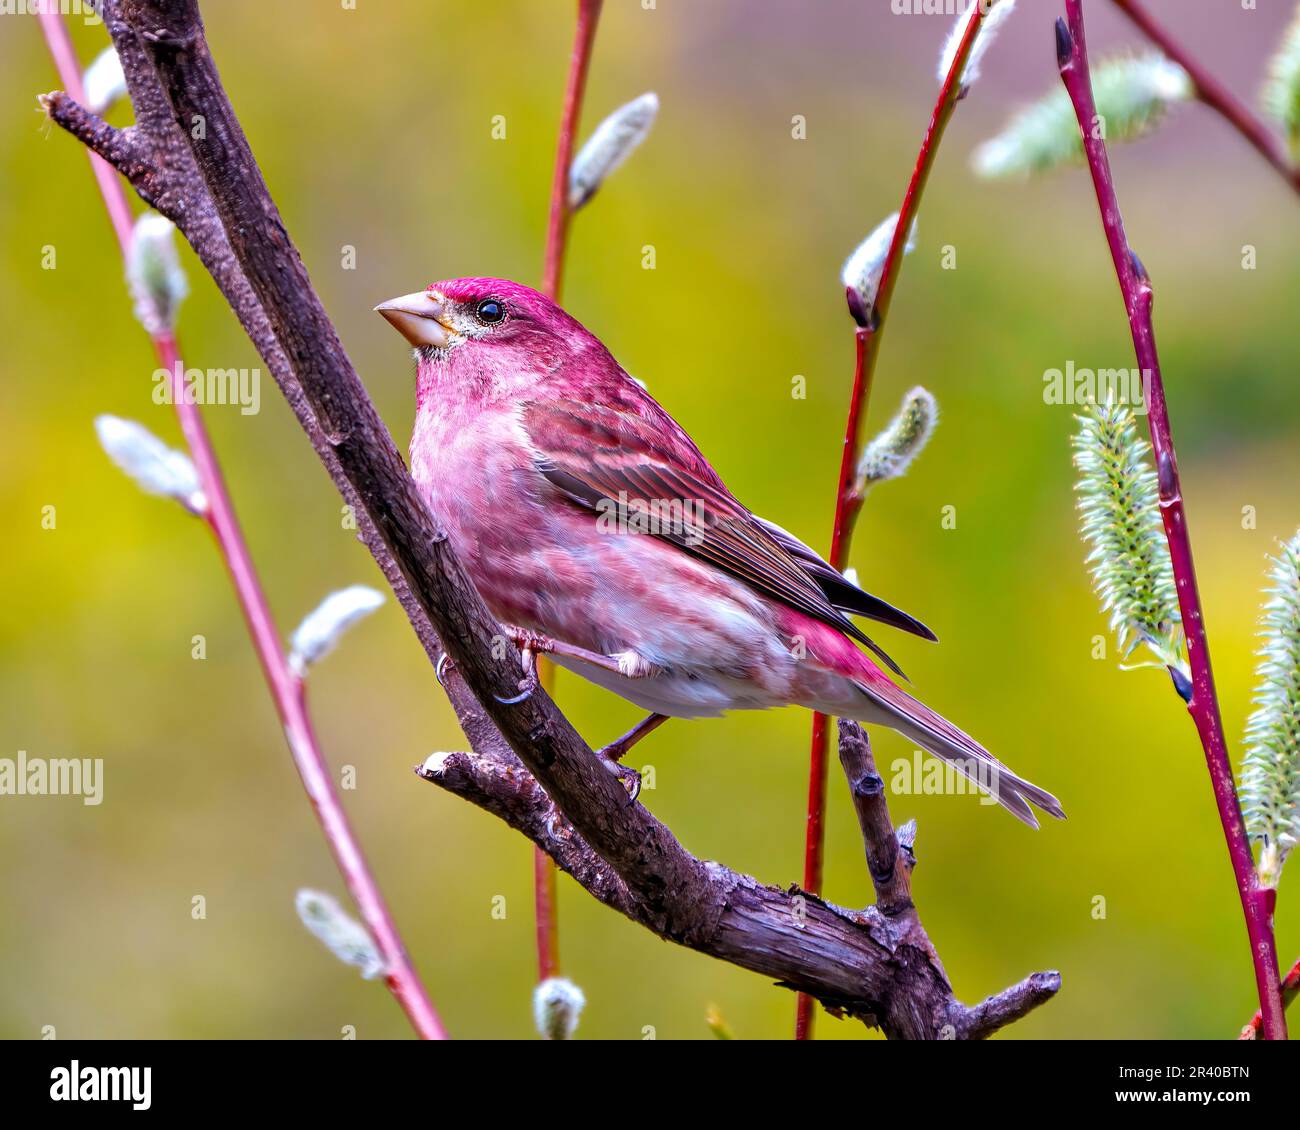 Purple Finch male close-up side view perched on a leaf bud branch in its environment and habitat with a colourful background in the springtime. Stock Photo